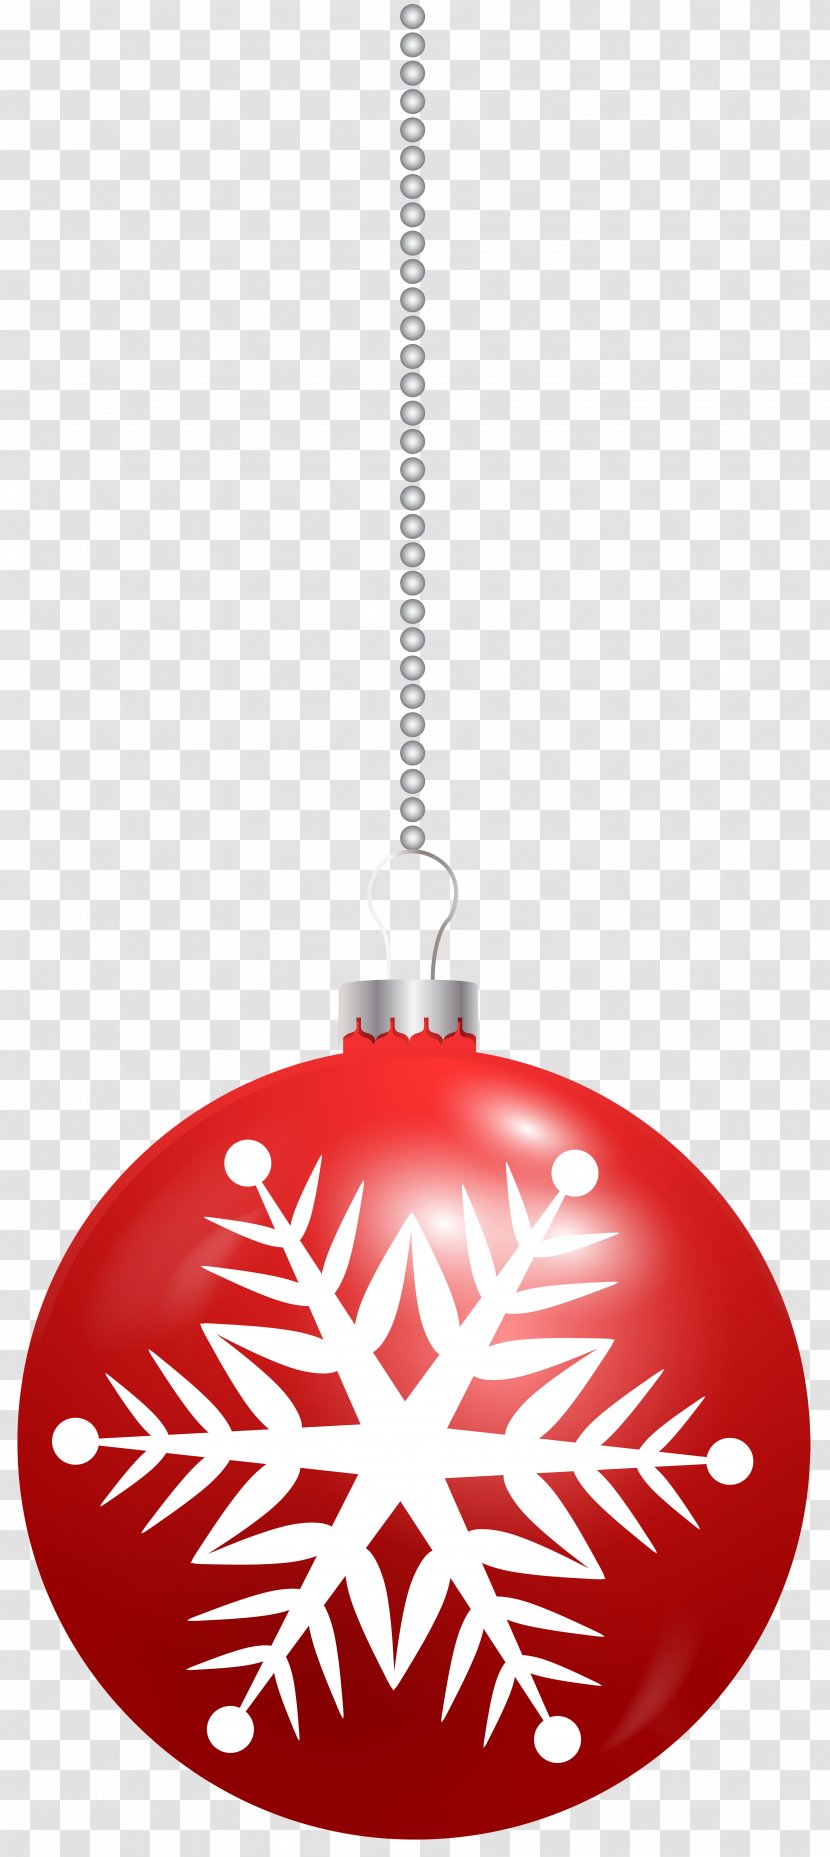 Volvo Trucks Snowflake Clip Art - Christmas Decoration - Ball With Image Transparent PNG